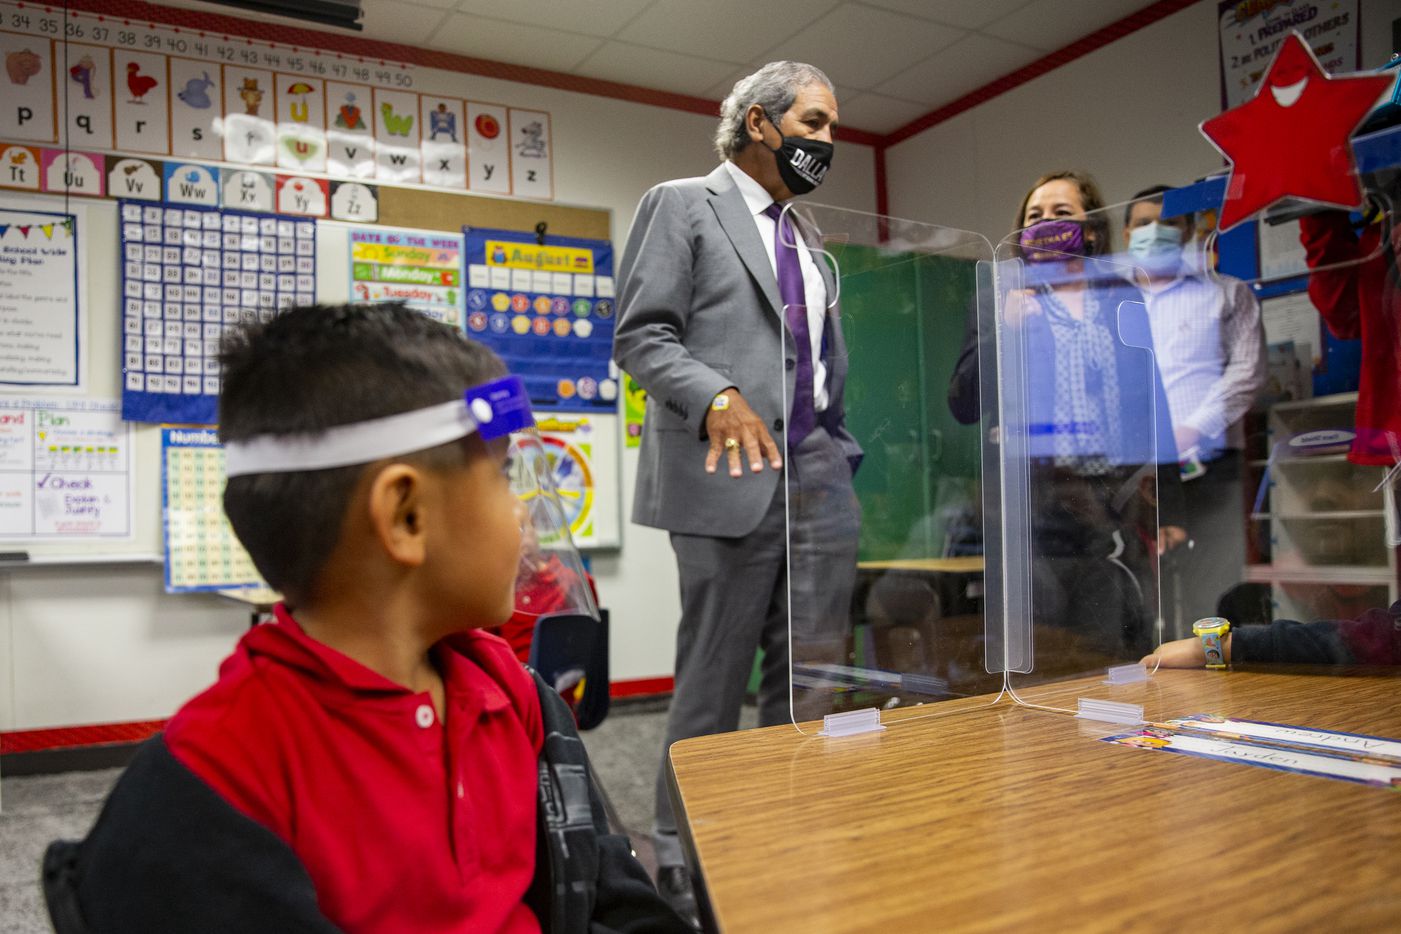 DISD superintendent Michael Hinojosa welcomes students in Ms. Ruiz's kindergarten as they attend in-person classes during their second "first day of school" at Winnetka Elementary School in Dallas Monday, Sept. 28, 2020 . (Juan Figueroa/ The Dallas Morning News)